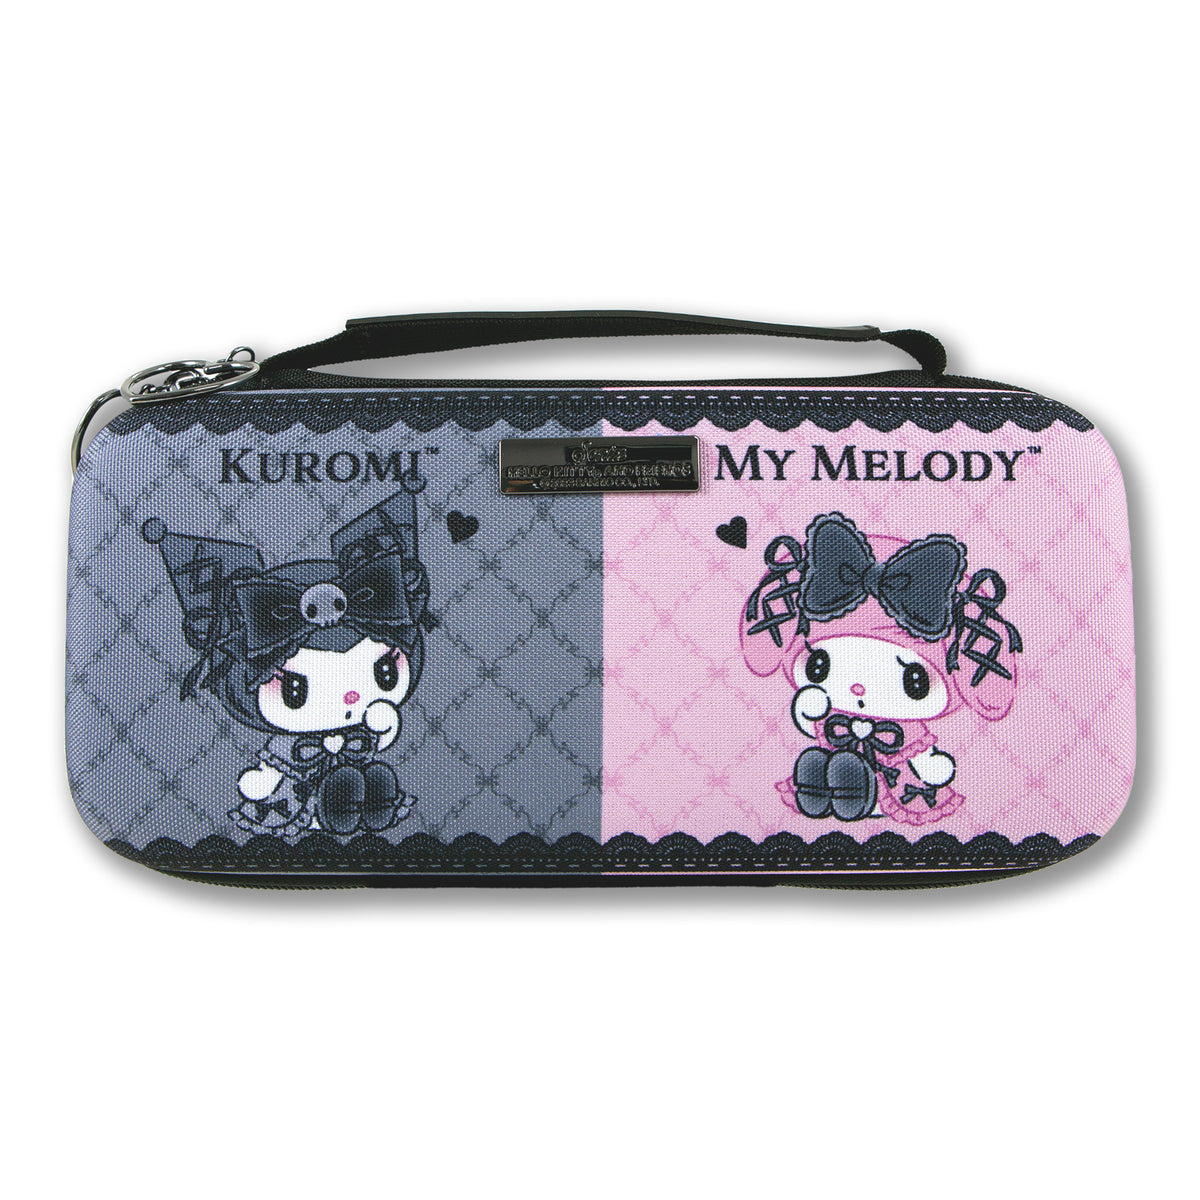 Kuromi and My Melody x Sonix Nintendo Switch Carrying Case Accessory BySonix Inc.   